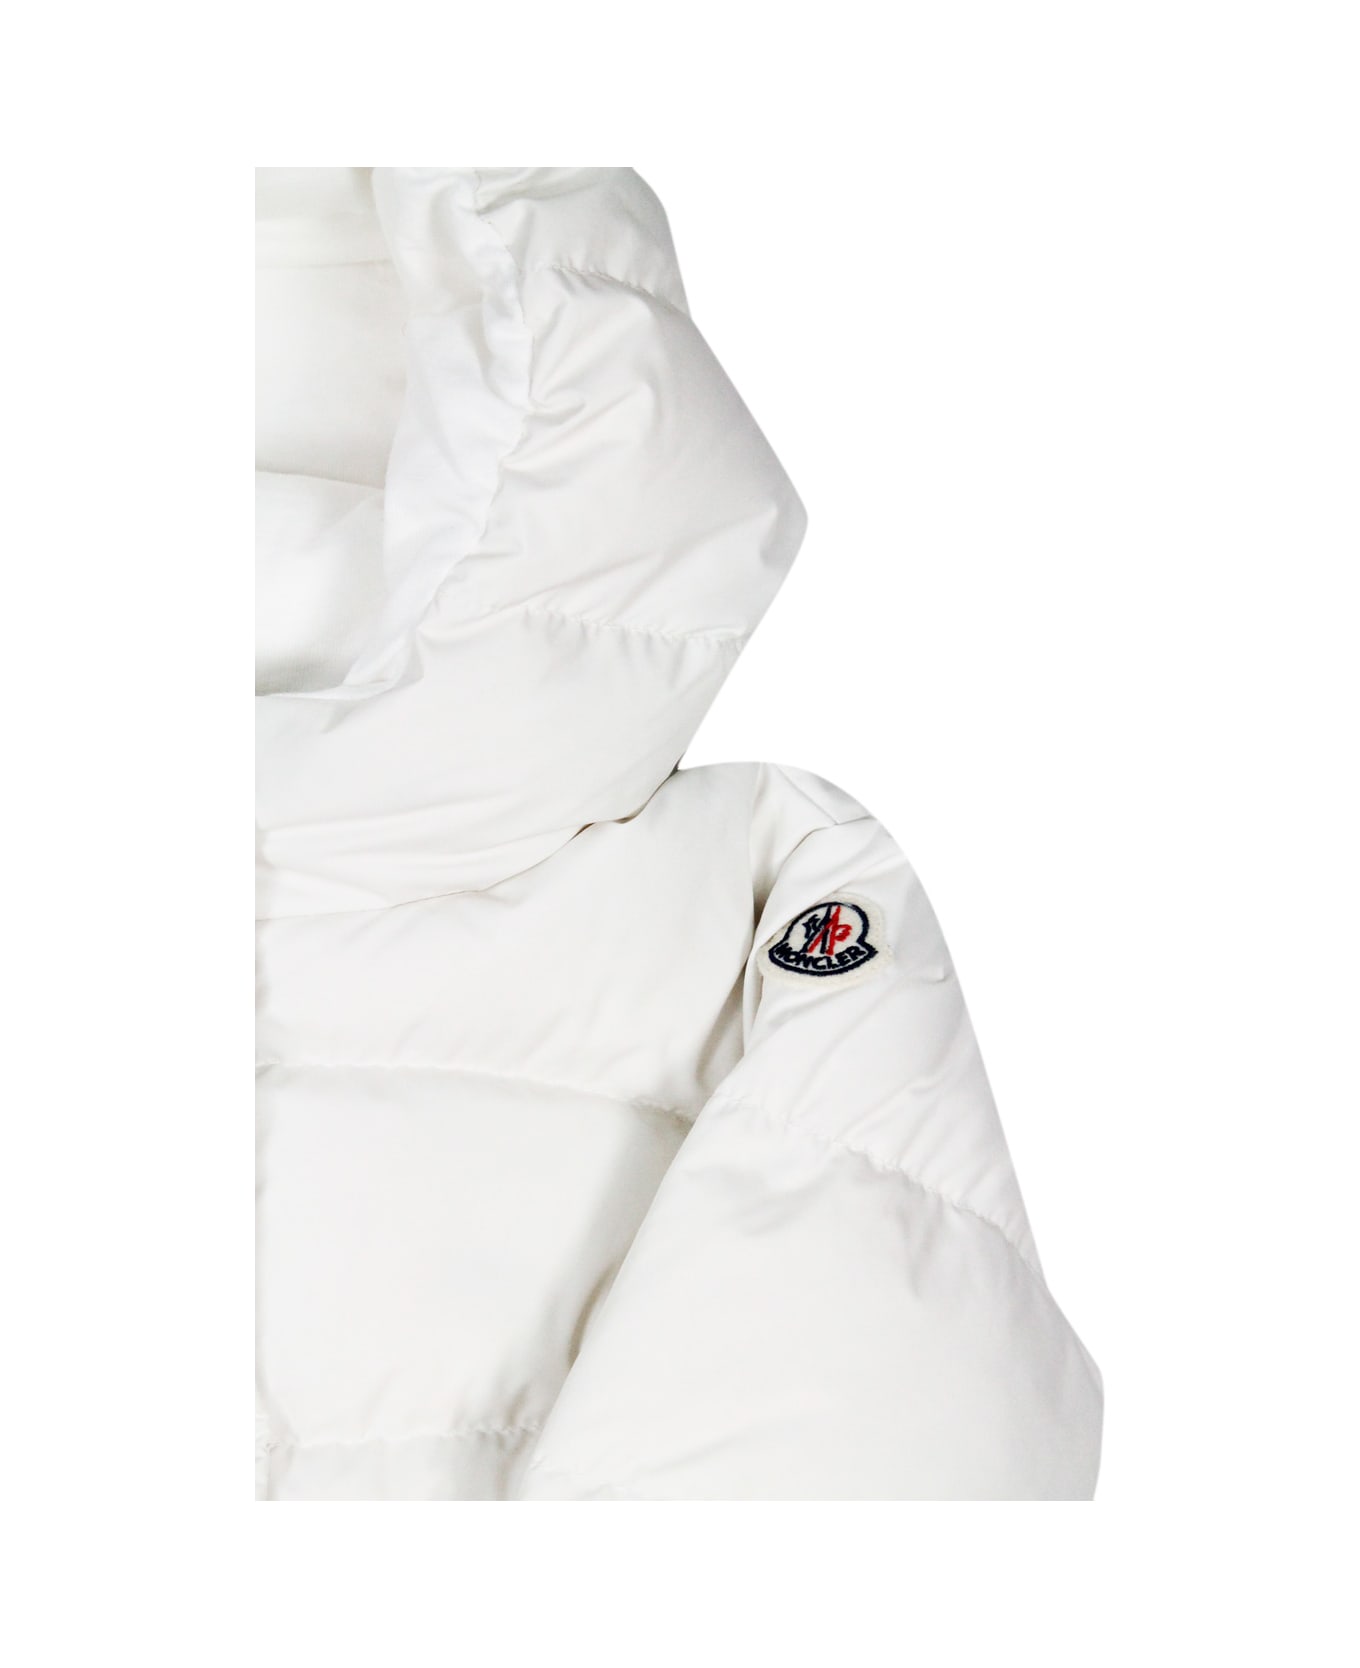 Moncler Ebre Down Jacket Padded With Real White Goose Down With Hood, Zip And Snap Button Closure And Front Pockets - White